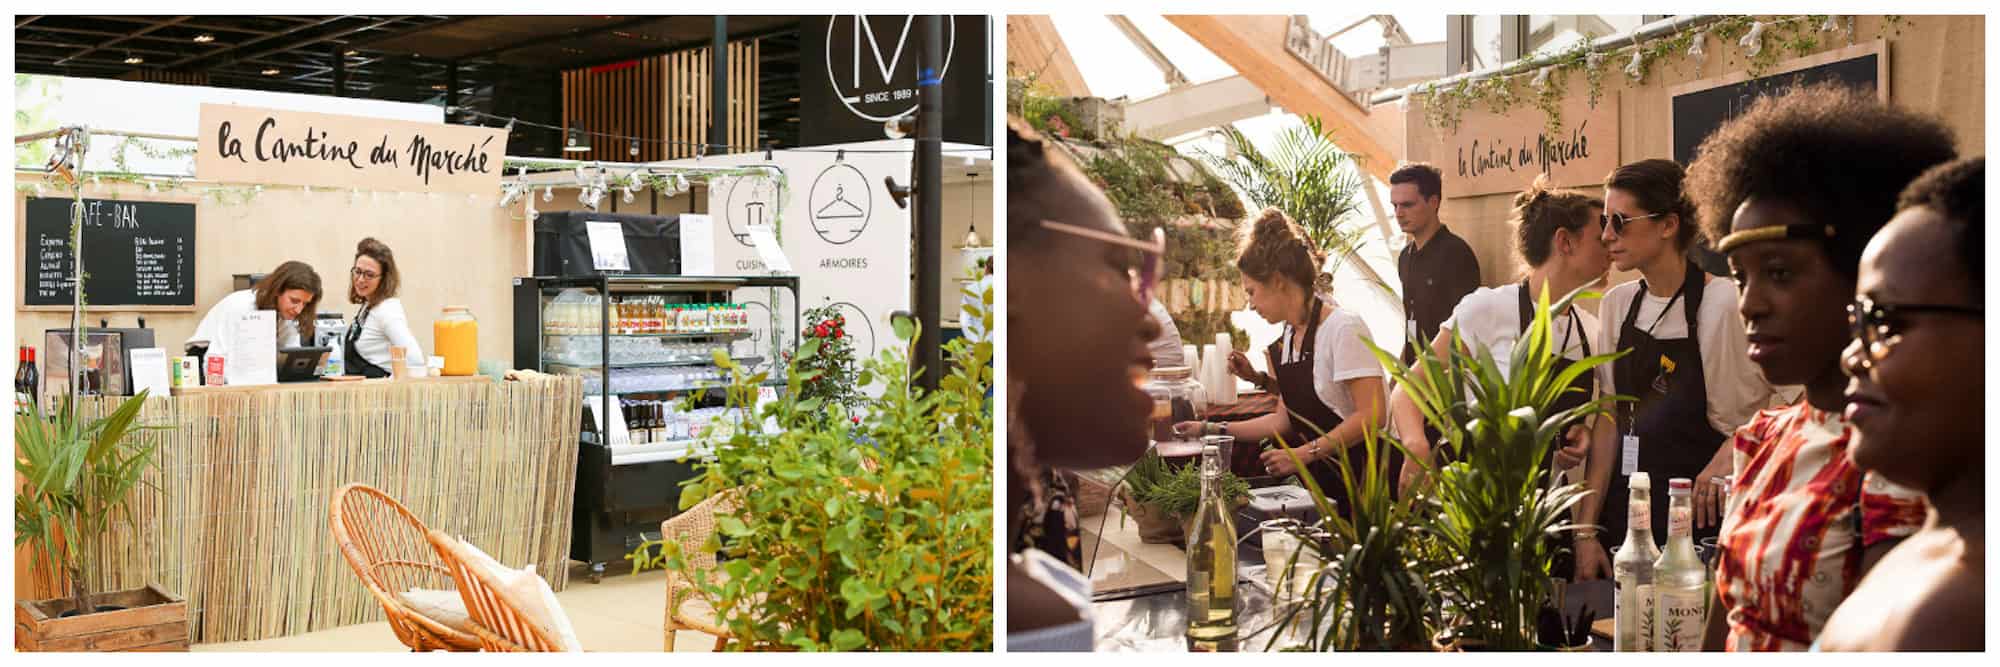 Sustainable food shopping in Paris at La Cantine du Marché, where there's a juice bar in plant-adorned surroundings (left). Three girls enjoying a drink at La Cantine du Marché, with light filtering through the glass roof (right).